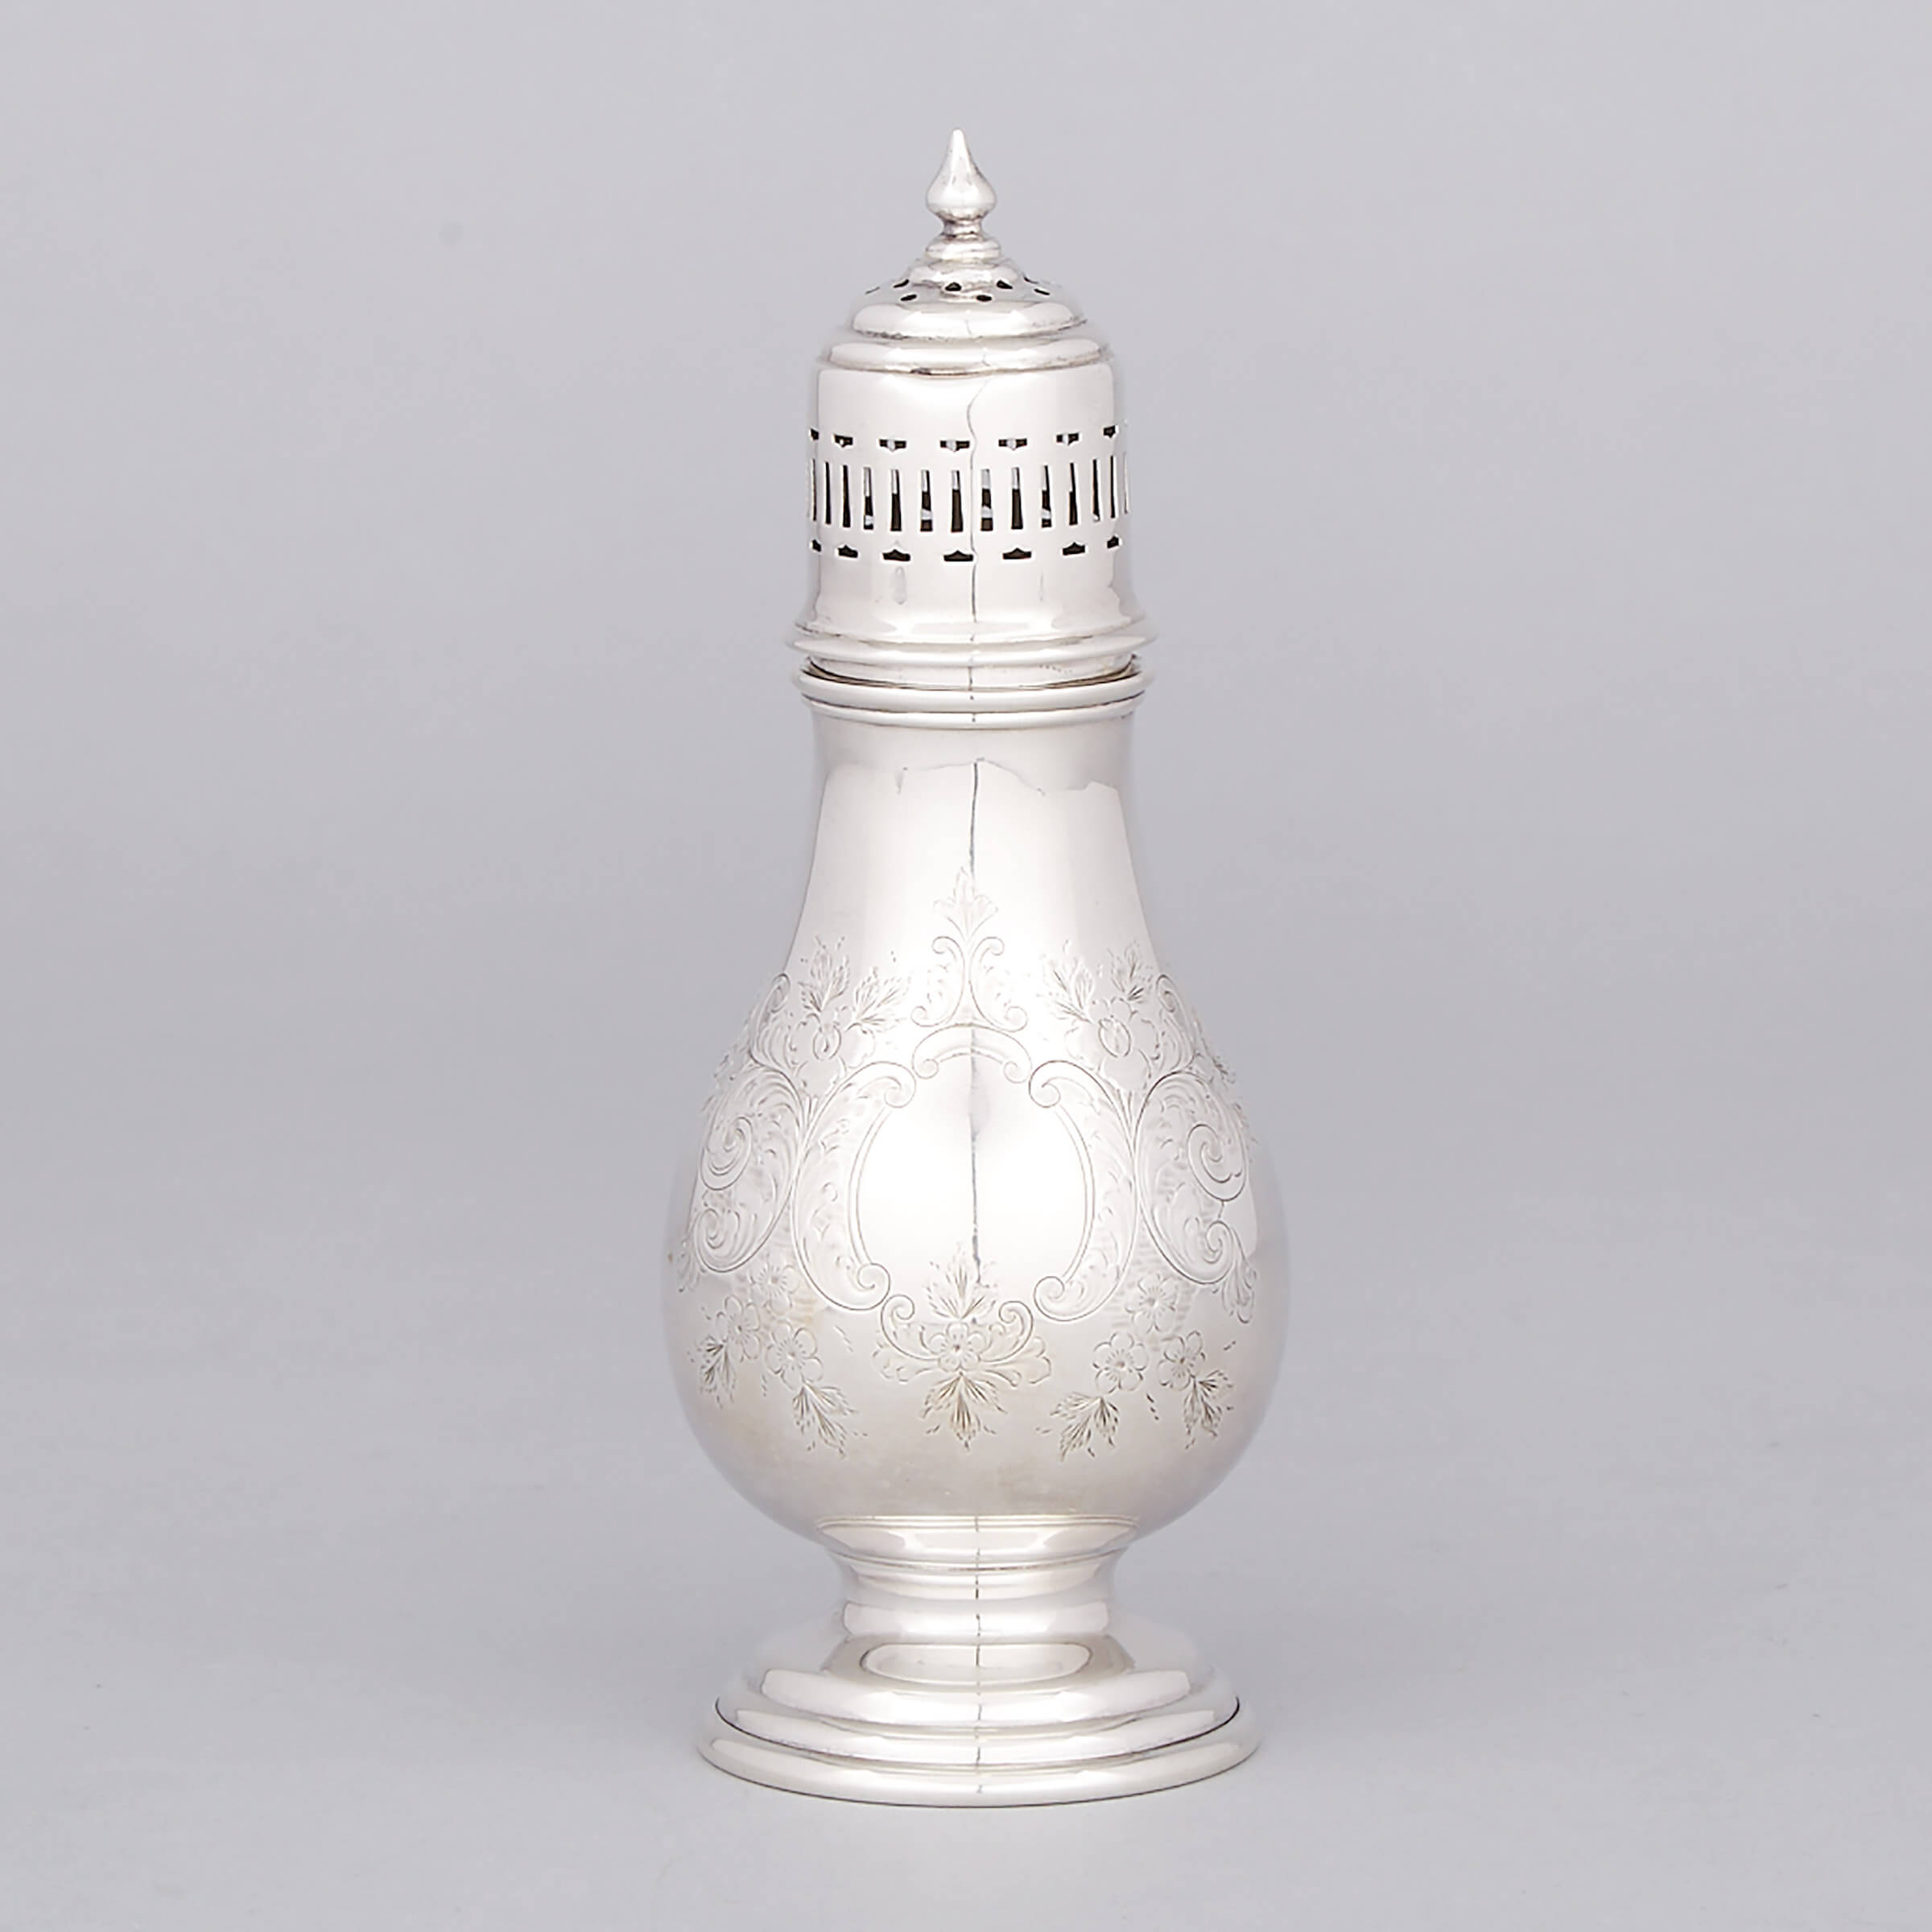 Canadian Silver Sugar Caster, Henry Birks & Sons, Montreal, Que., 20th century